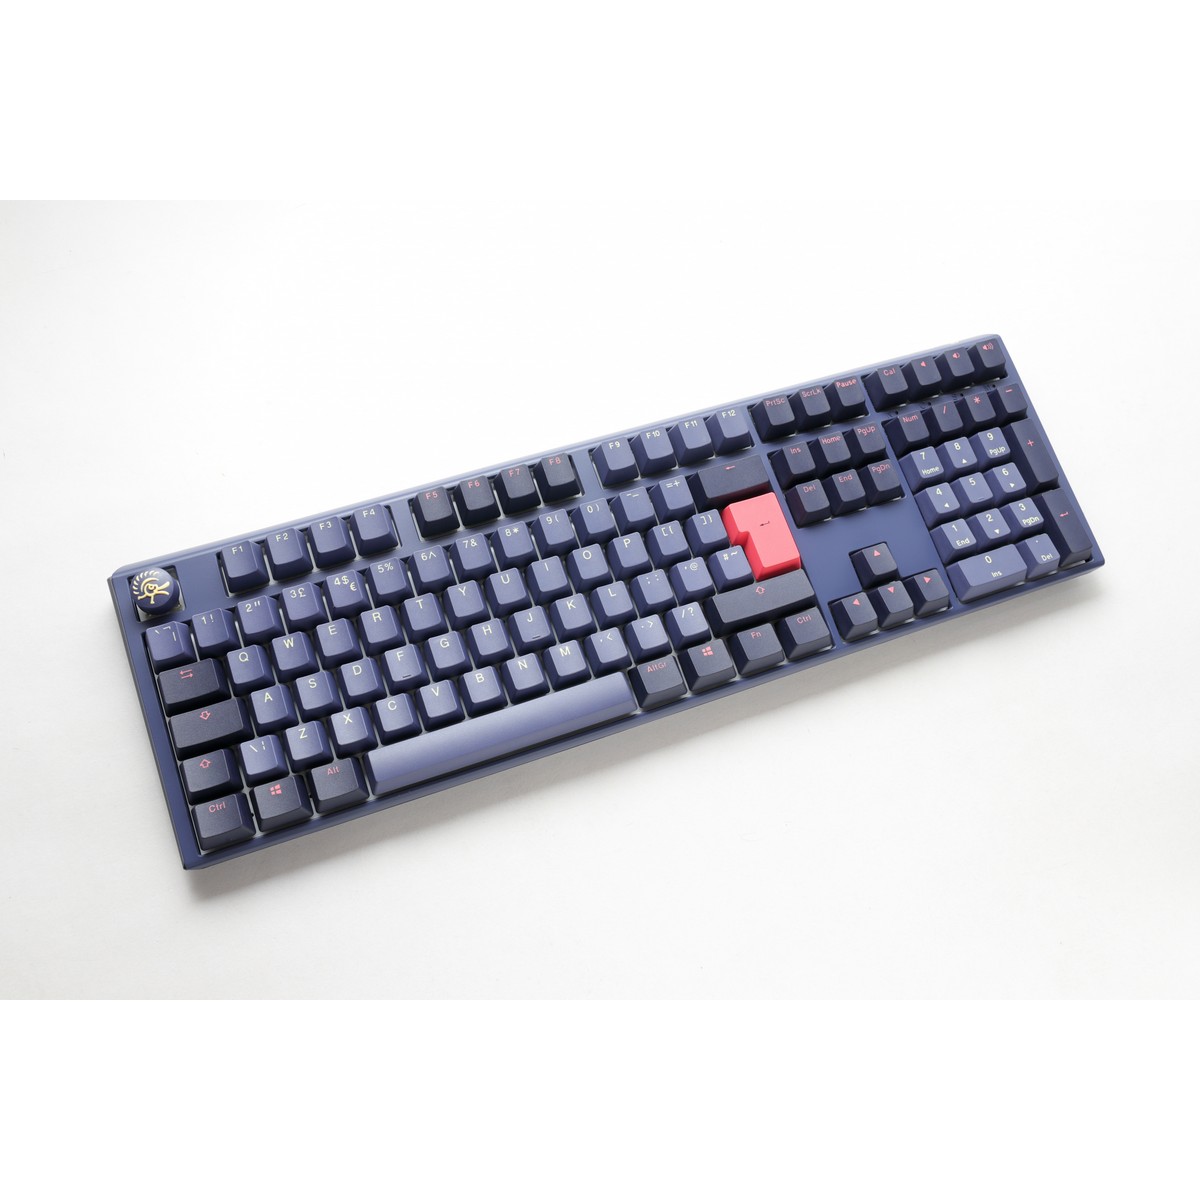 Ducky - Ducky One 3 Cosmic USB RGB Mechanical Gaming Keyboard Cherry MX Silent Red Switch - UK Layout